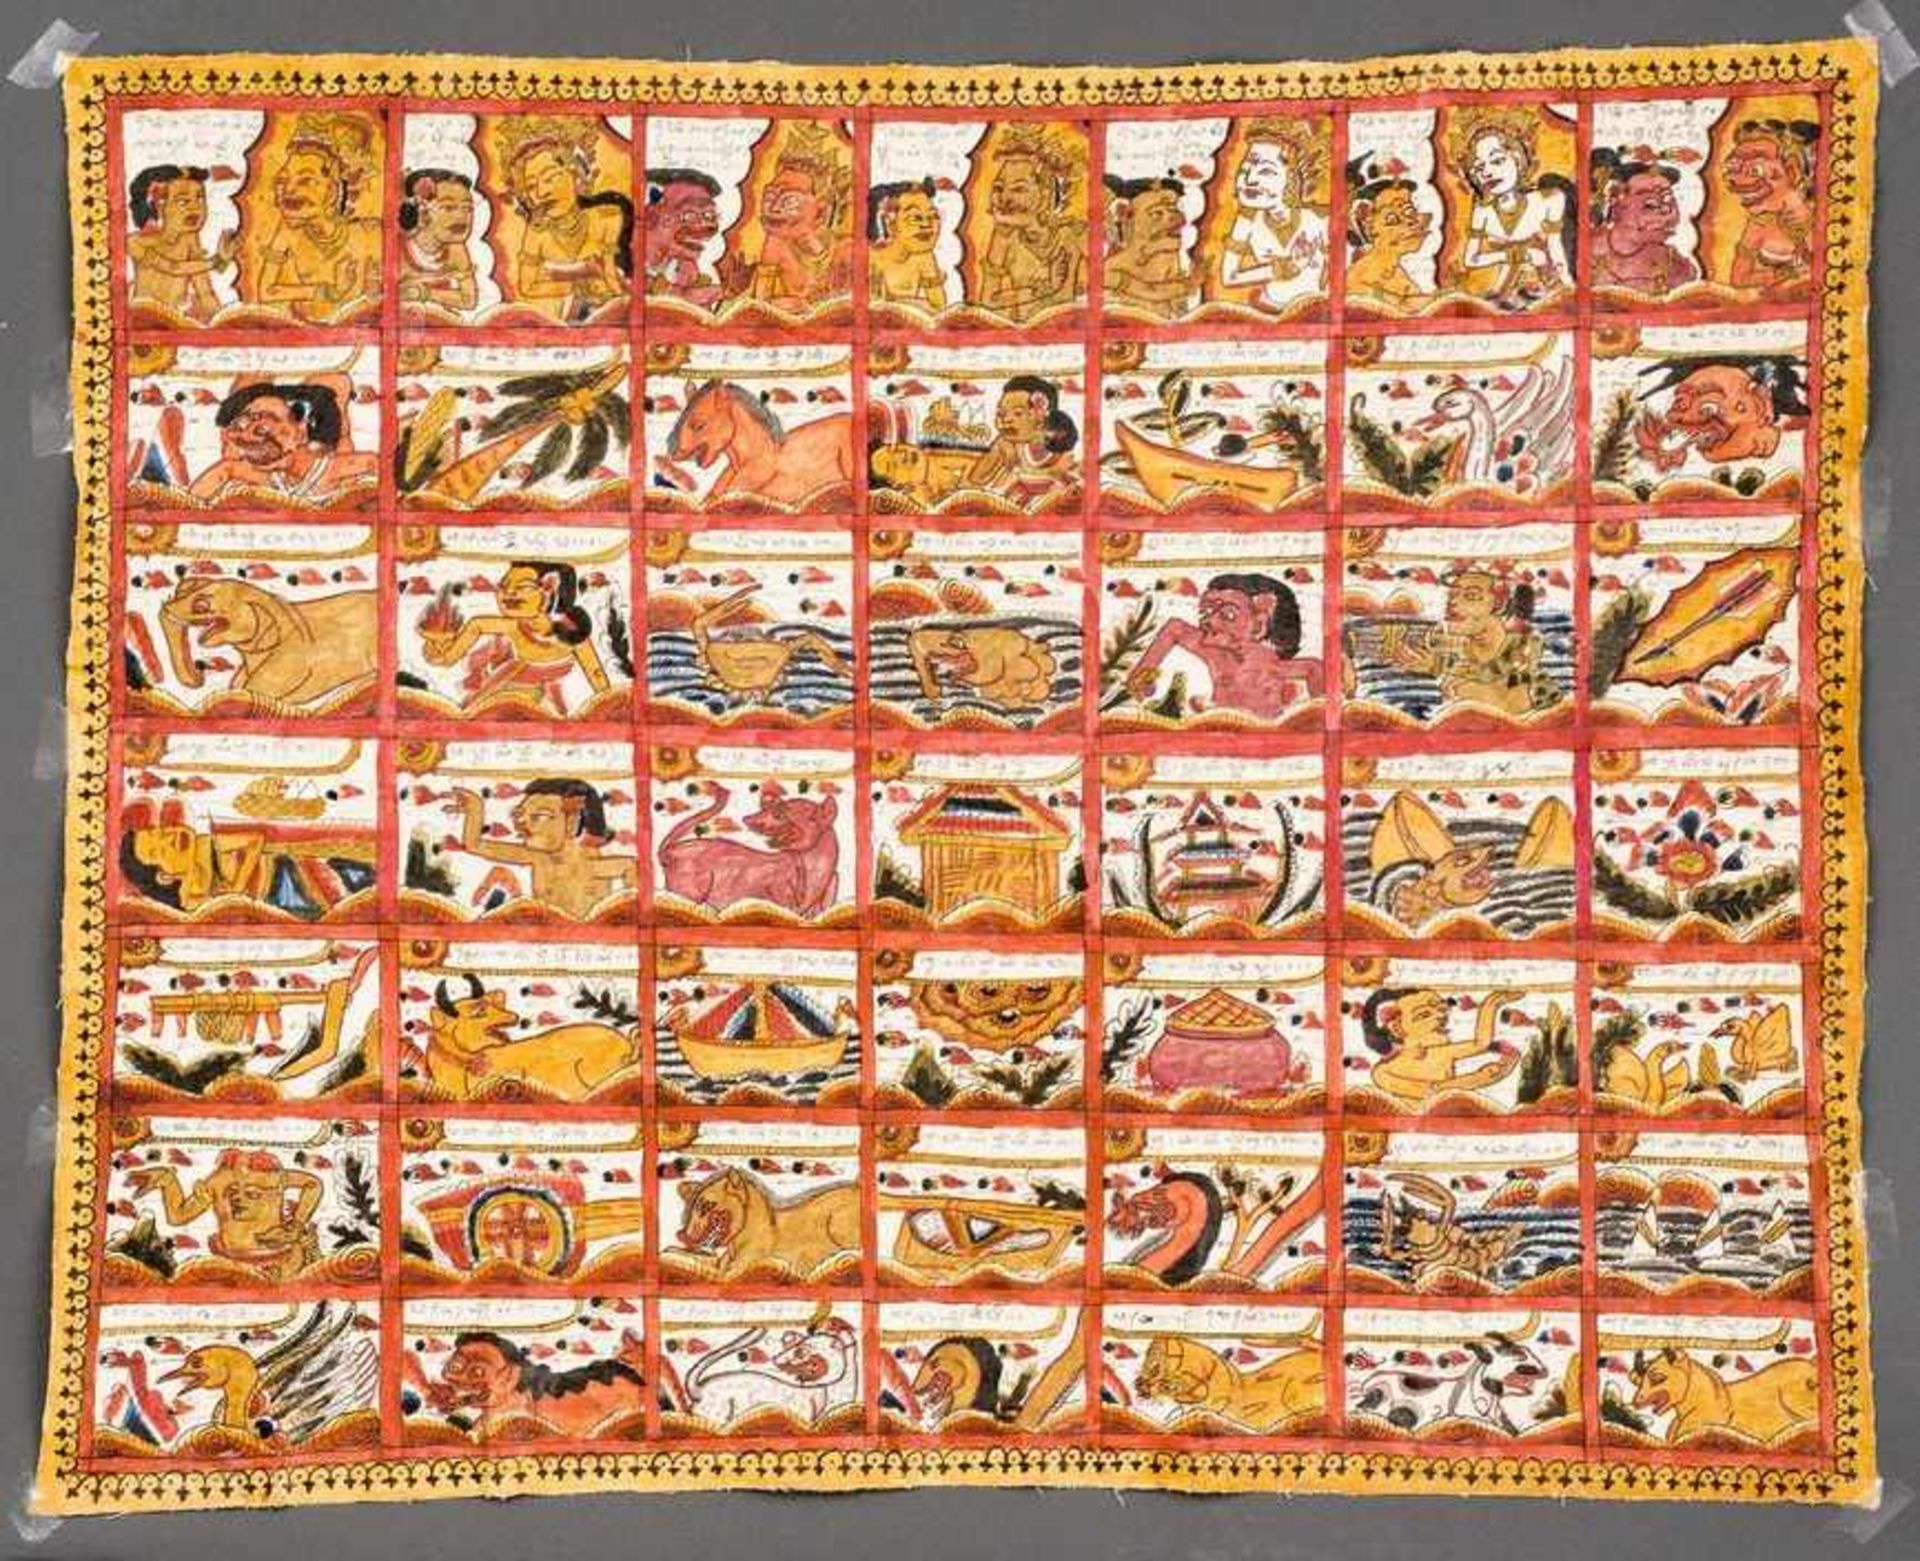 MULTI-FIGURED ASTROLOGICAL KEY Painting on fabric. Indonesia, Bali, 20th cent. A painting divided